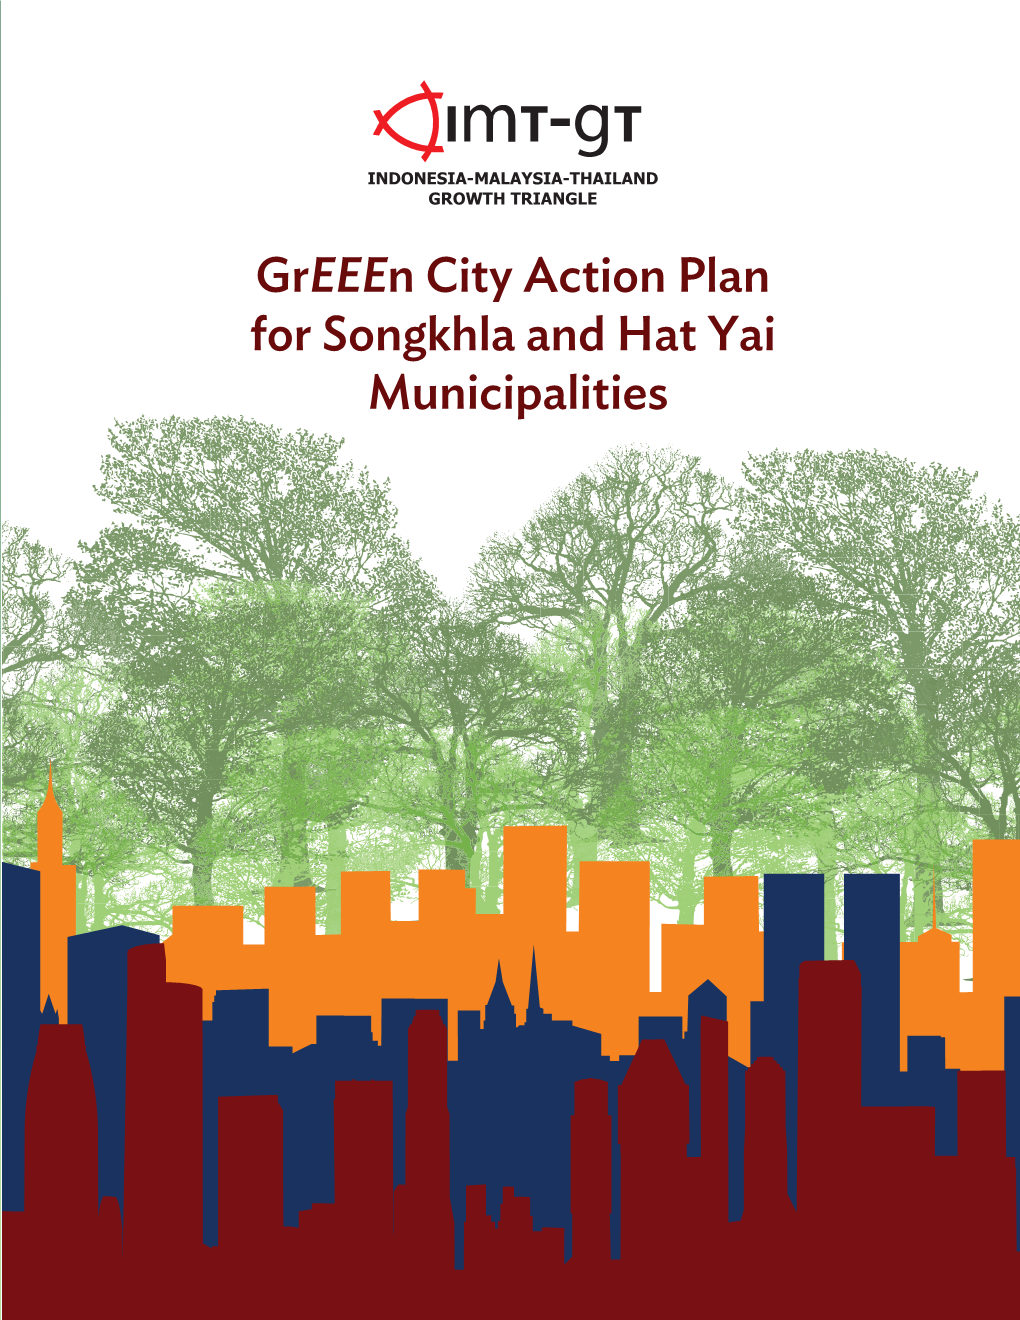 Greeen City Action Plan for Songkhla and Hat Yai Municipalities INDONESIA-MALAYSIA-THAILAND GROWTH TRIANGLE